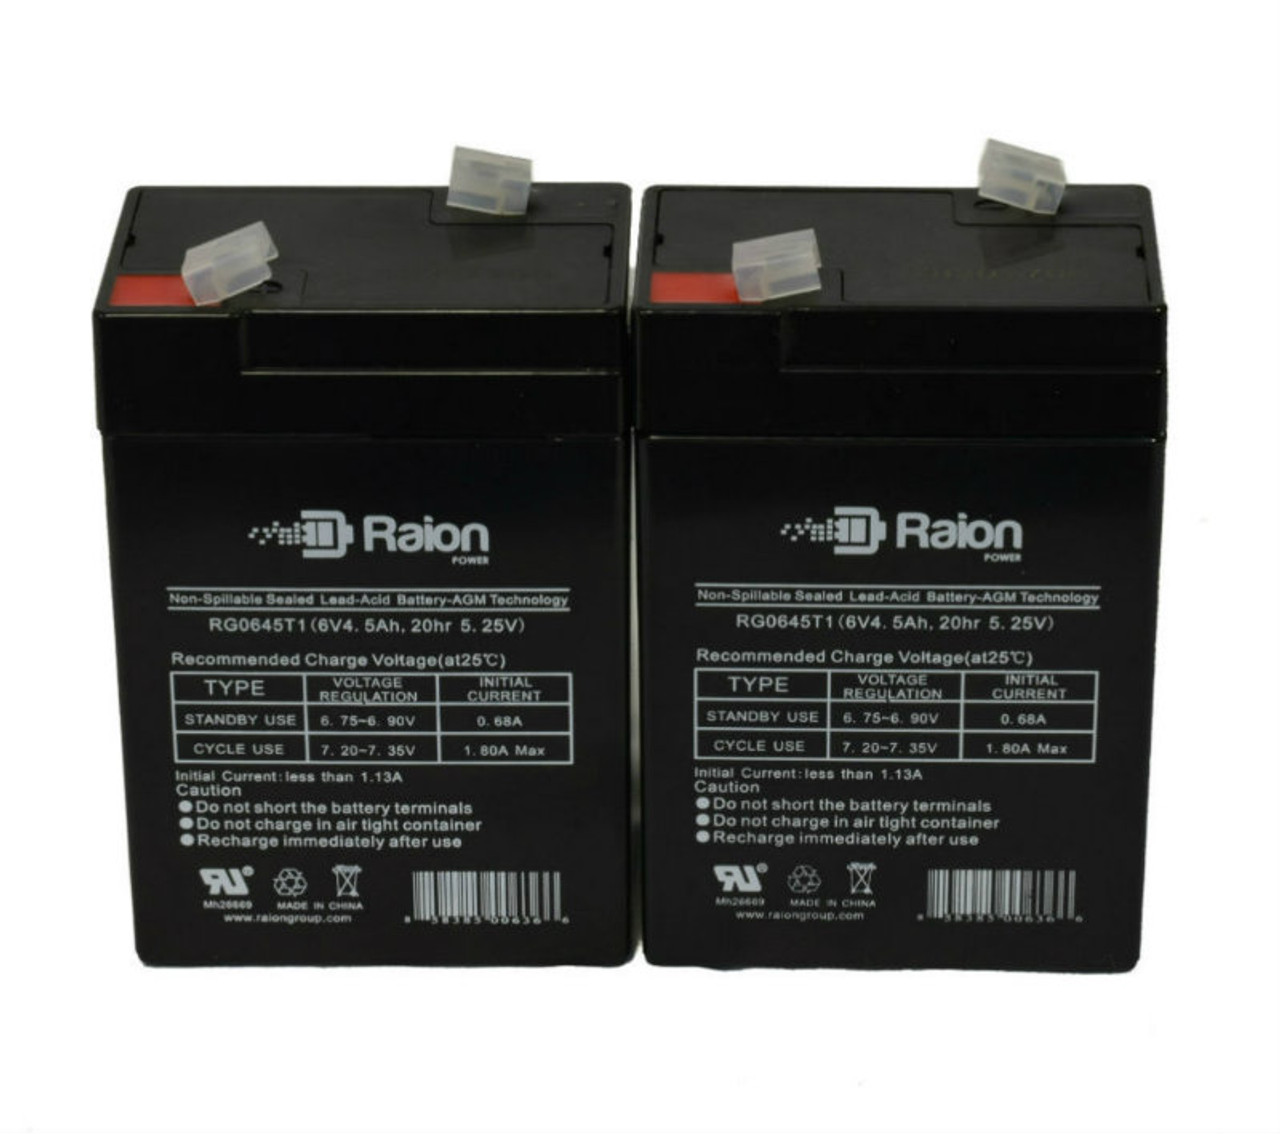 Raion Power 6 Volt 4.5Ah RG0645T1 Replacement Battery for Napel NP640 - 2 Pack